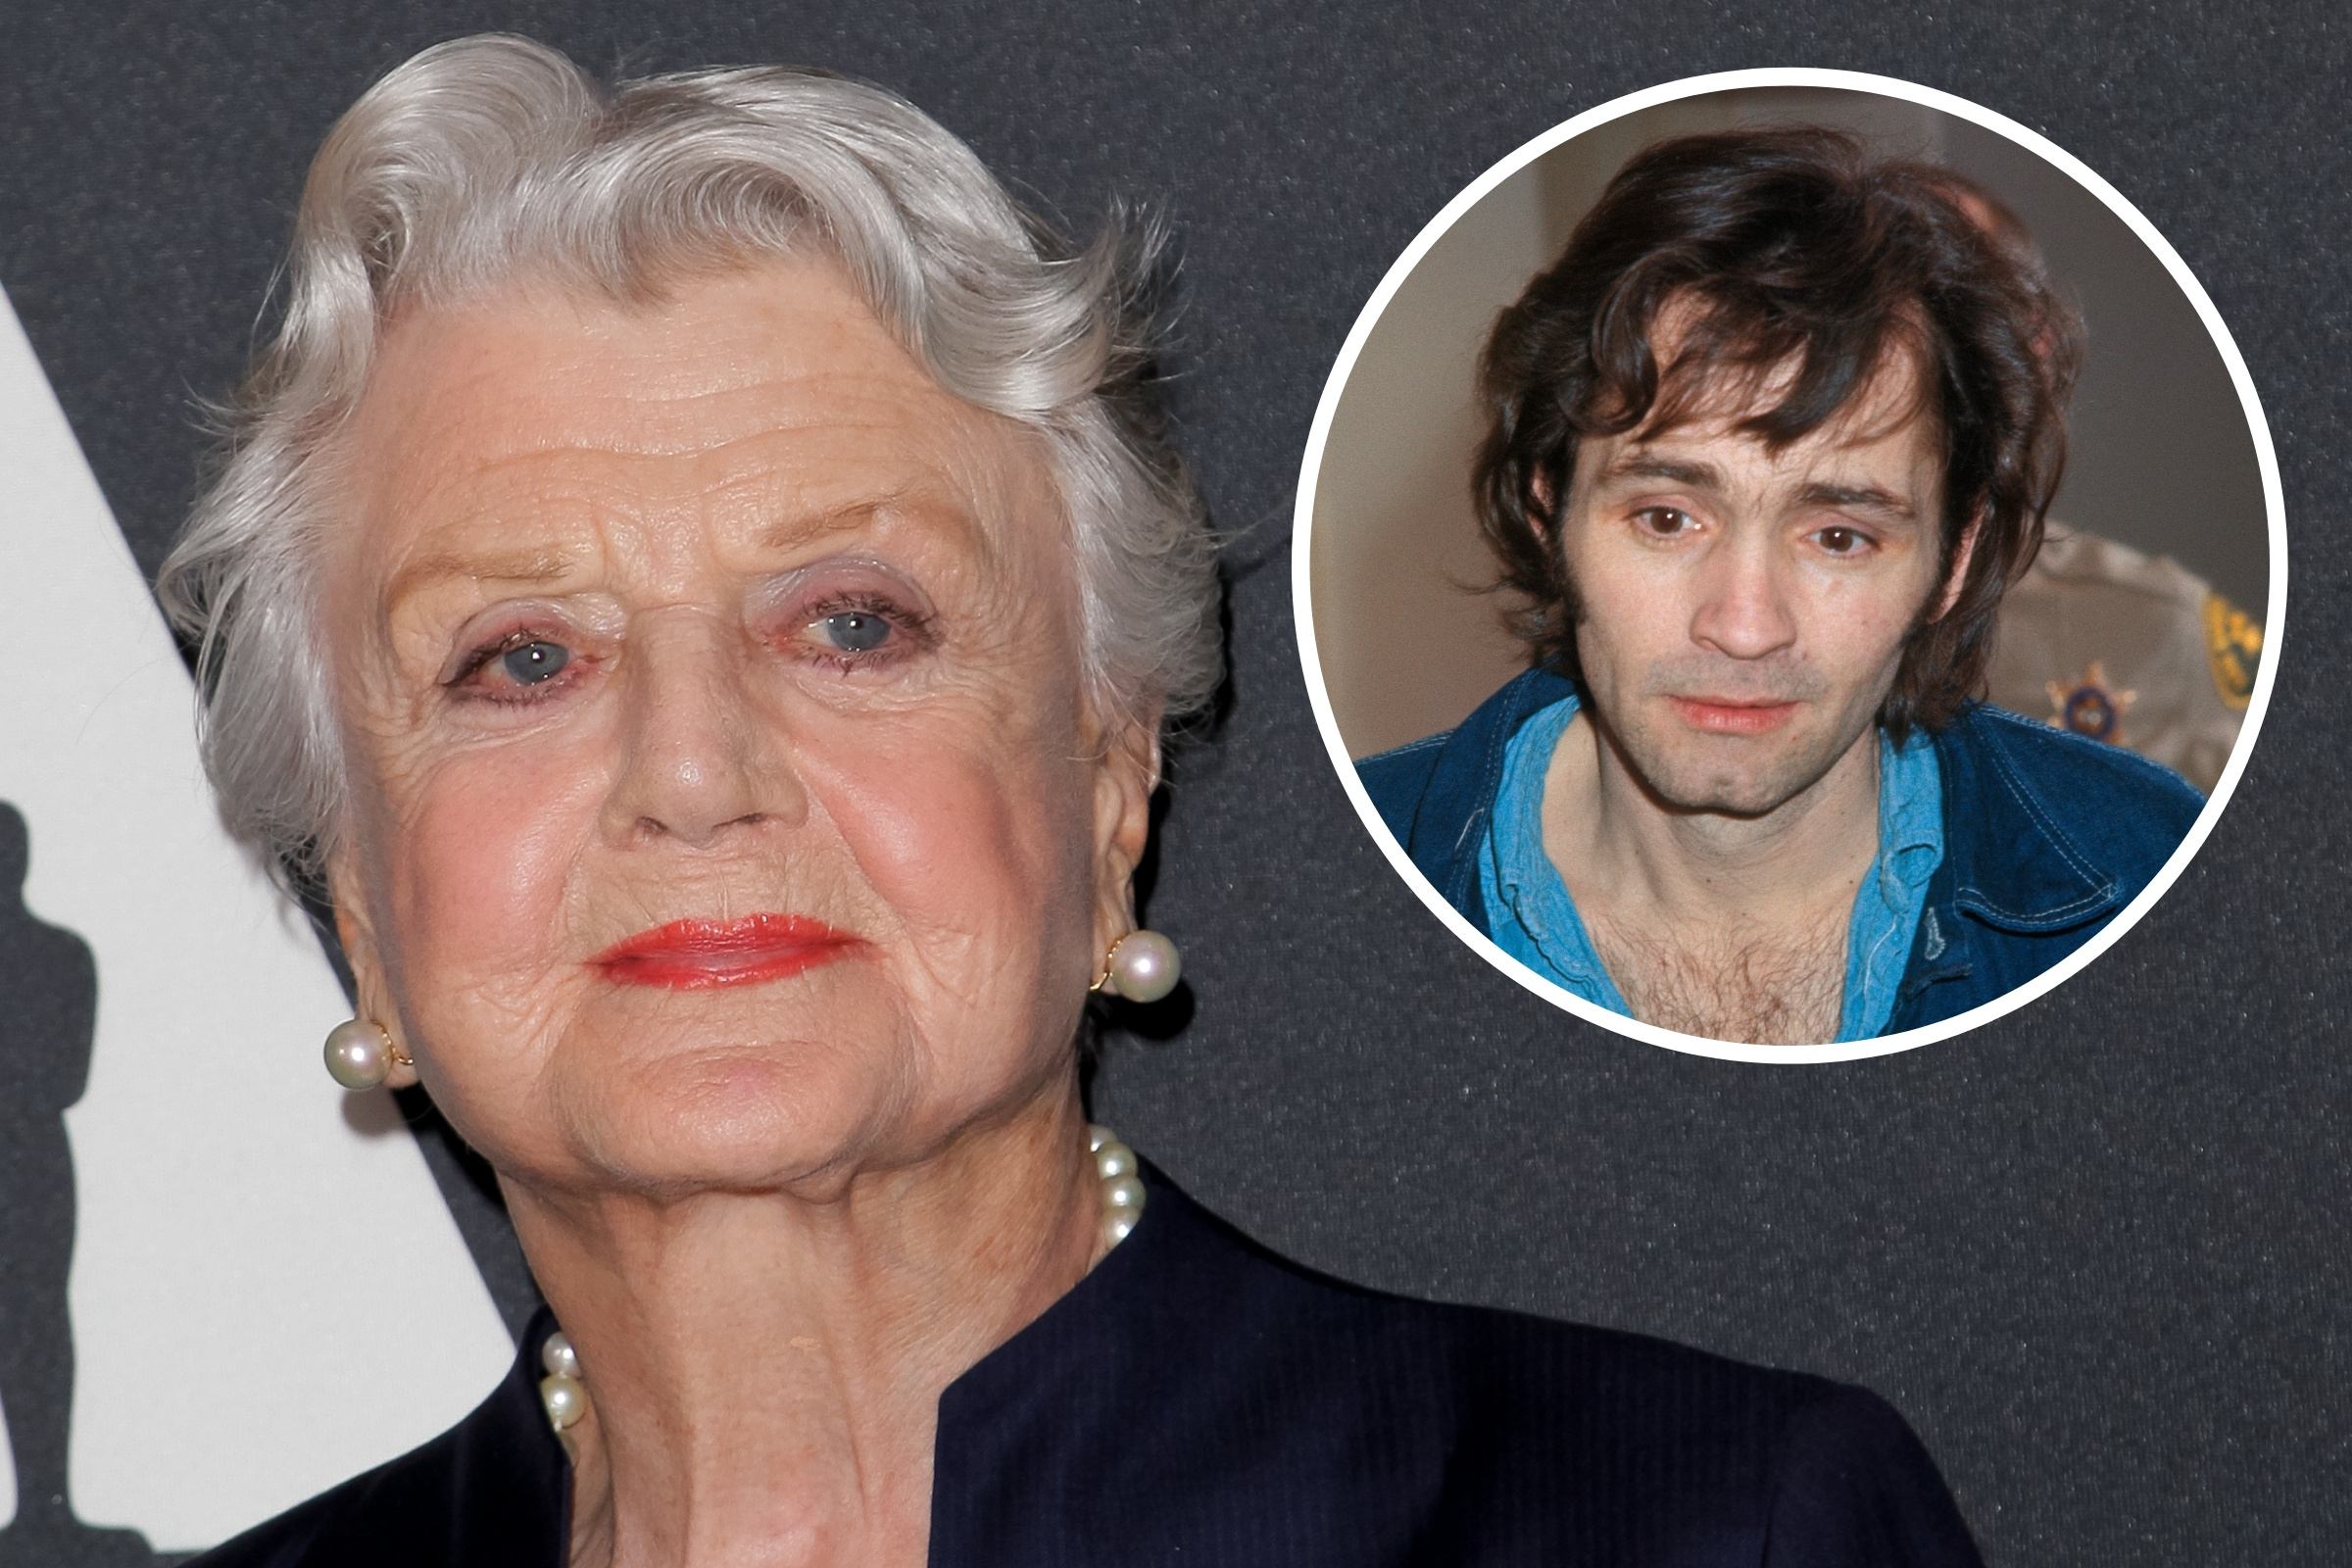 How Angela Lansbury Saved Her Daughter From Charles Manson's Cult